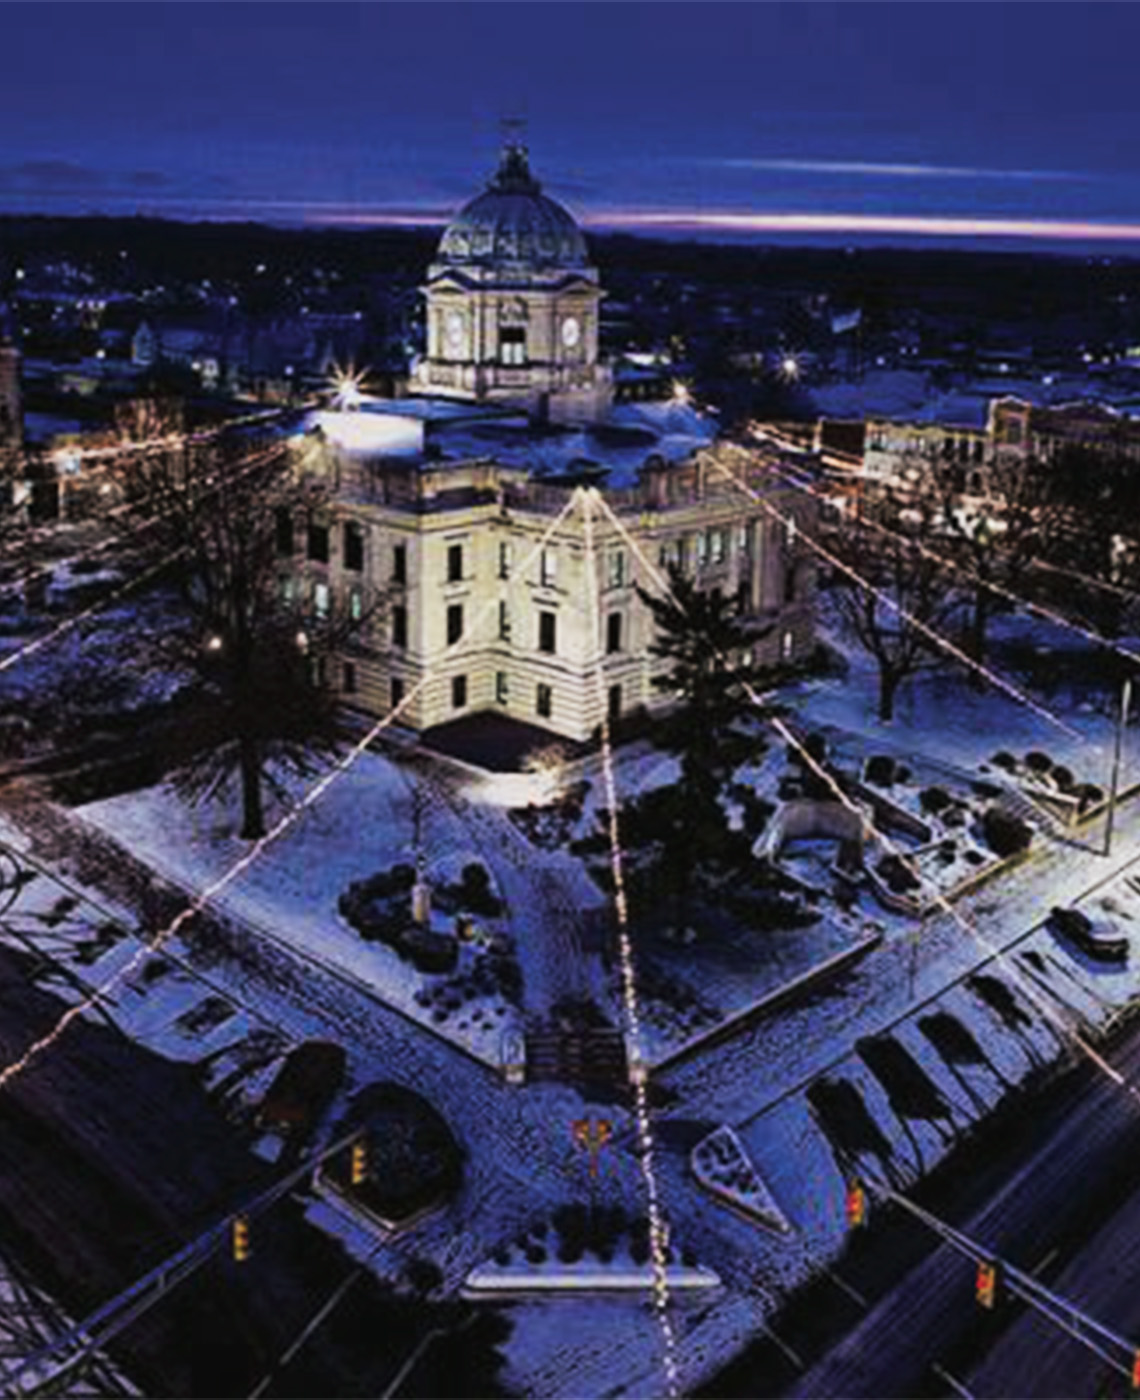 Aerial view of Bloomington Indiana courthouse at nighttime